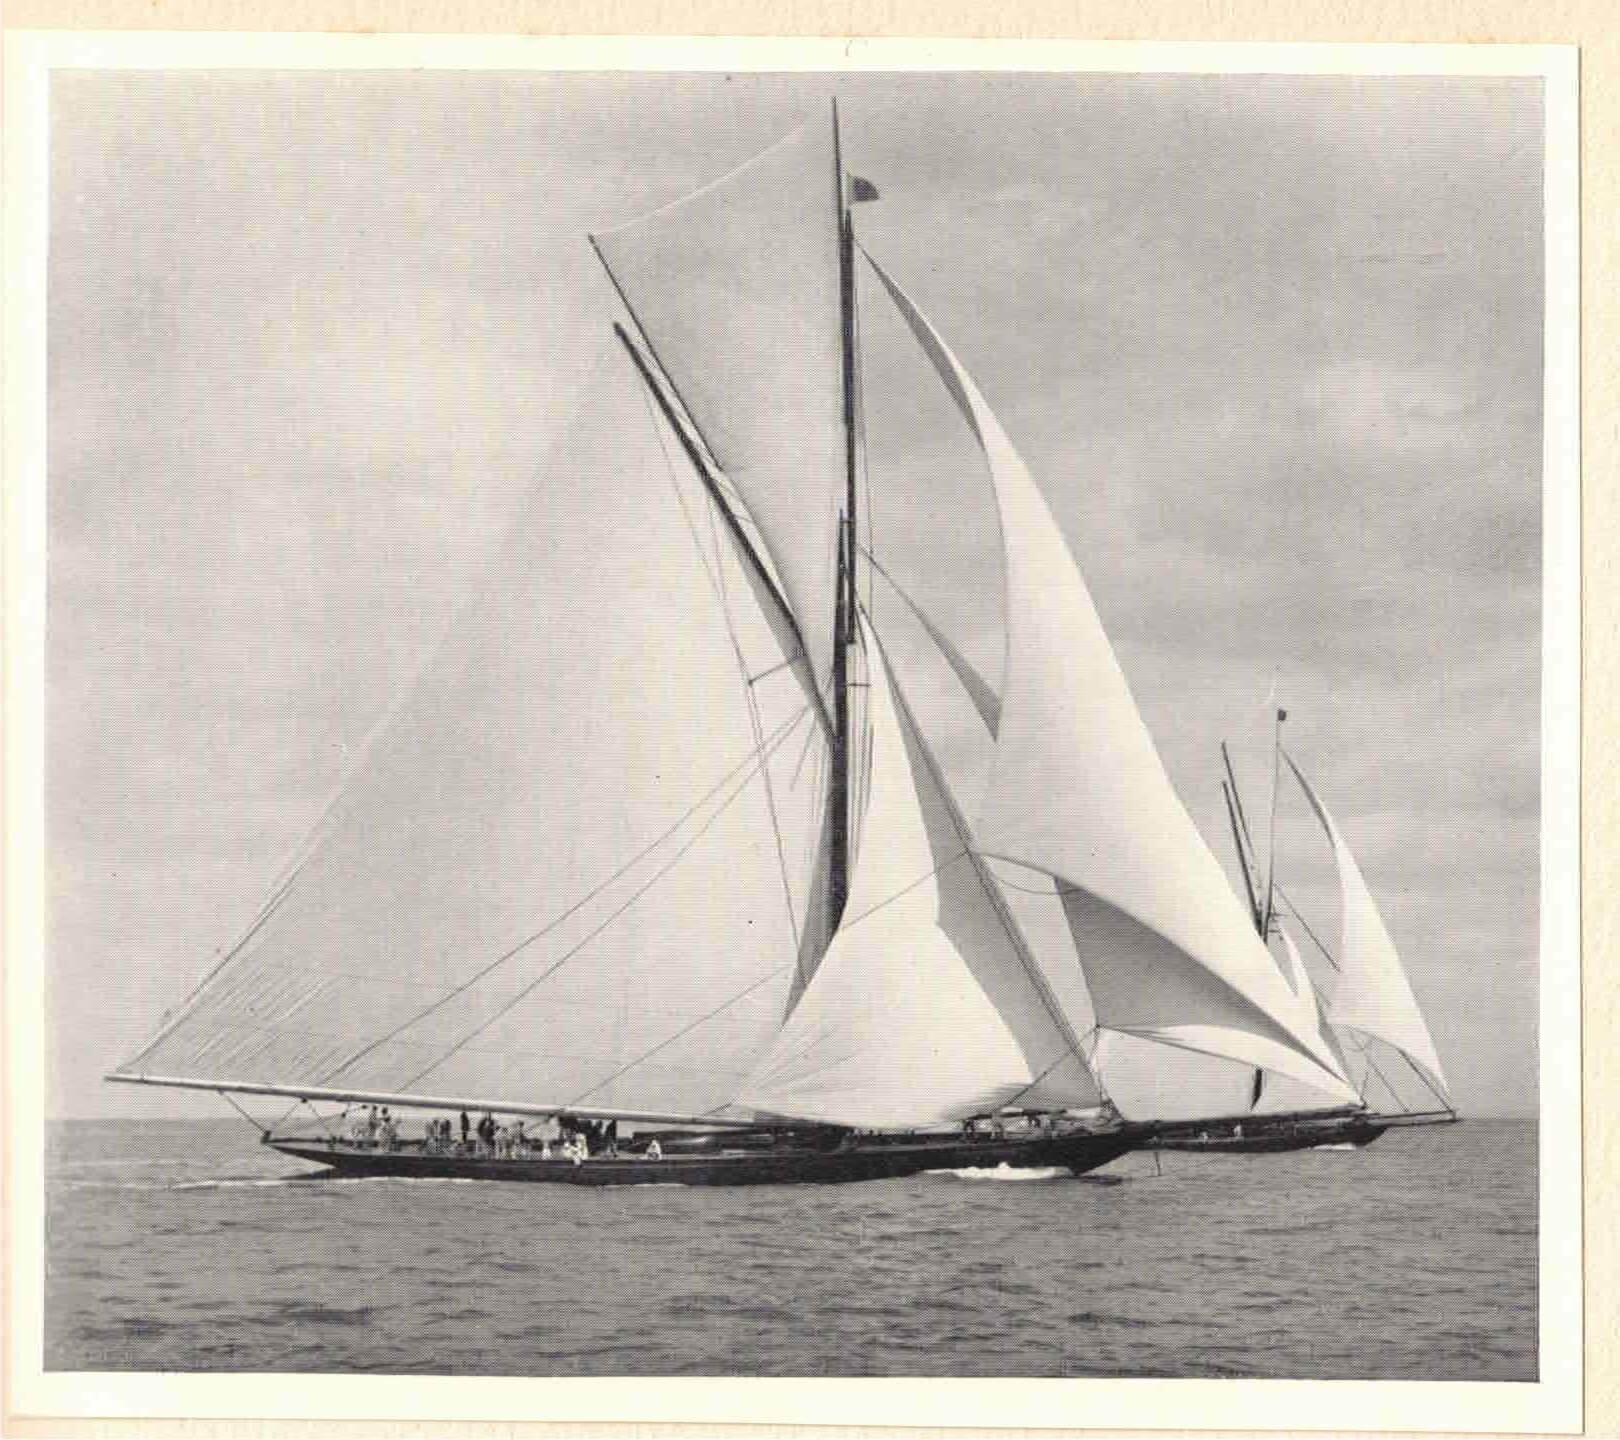 Racing against the cutter Meteor in 1896